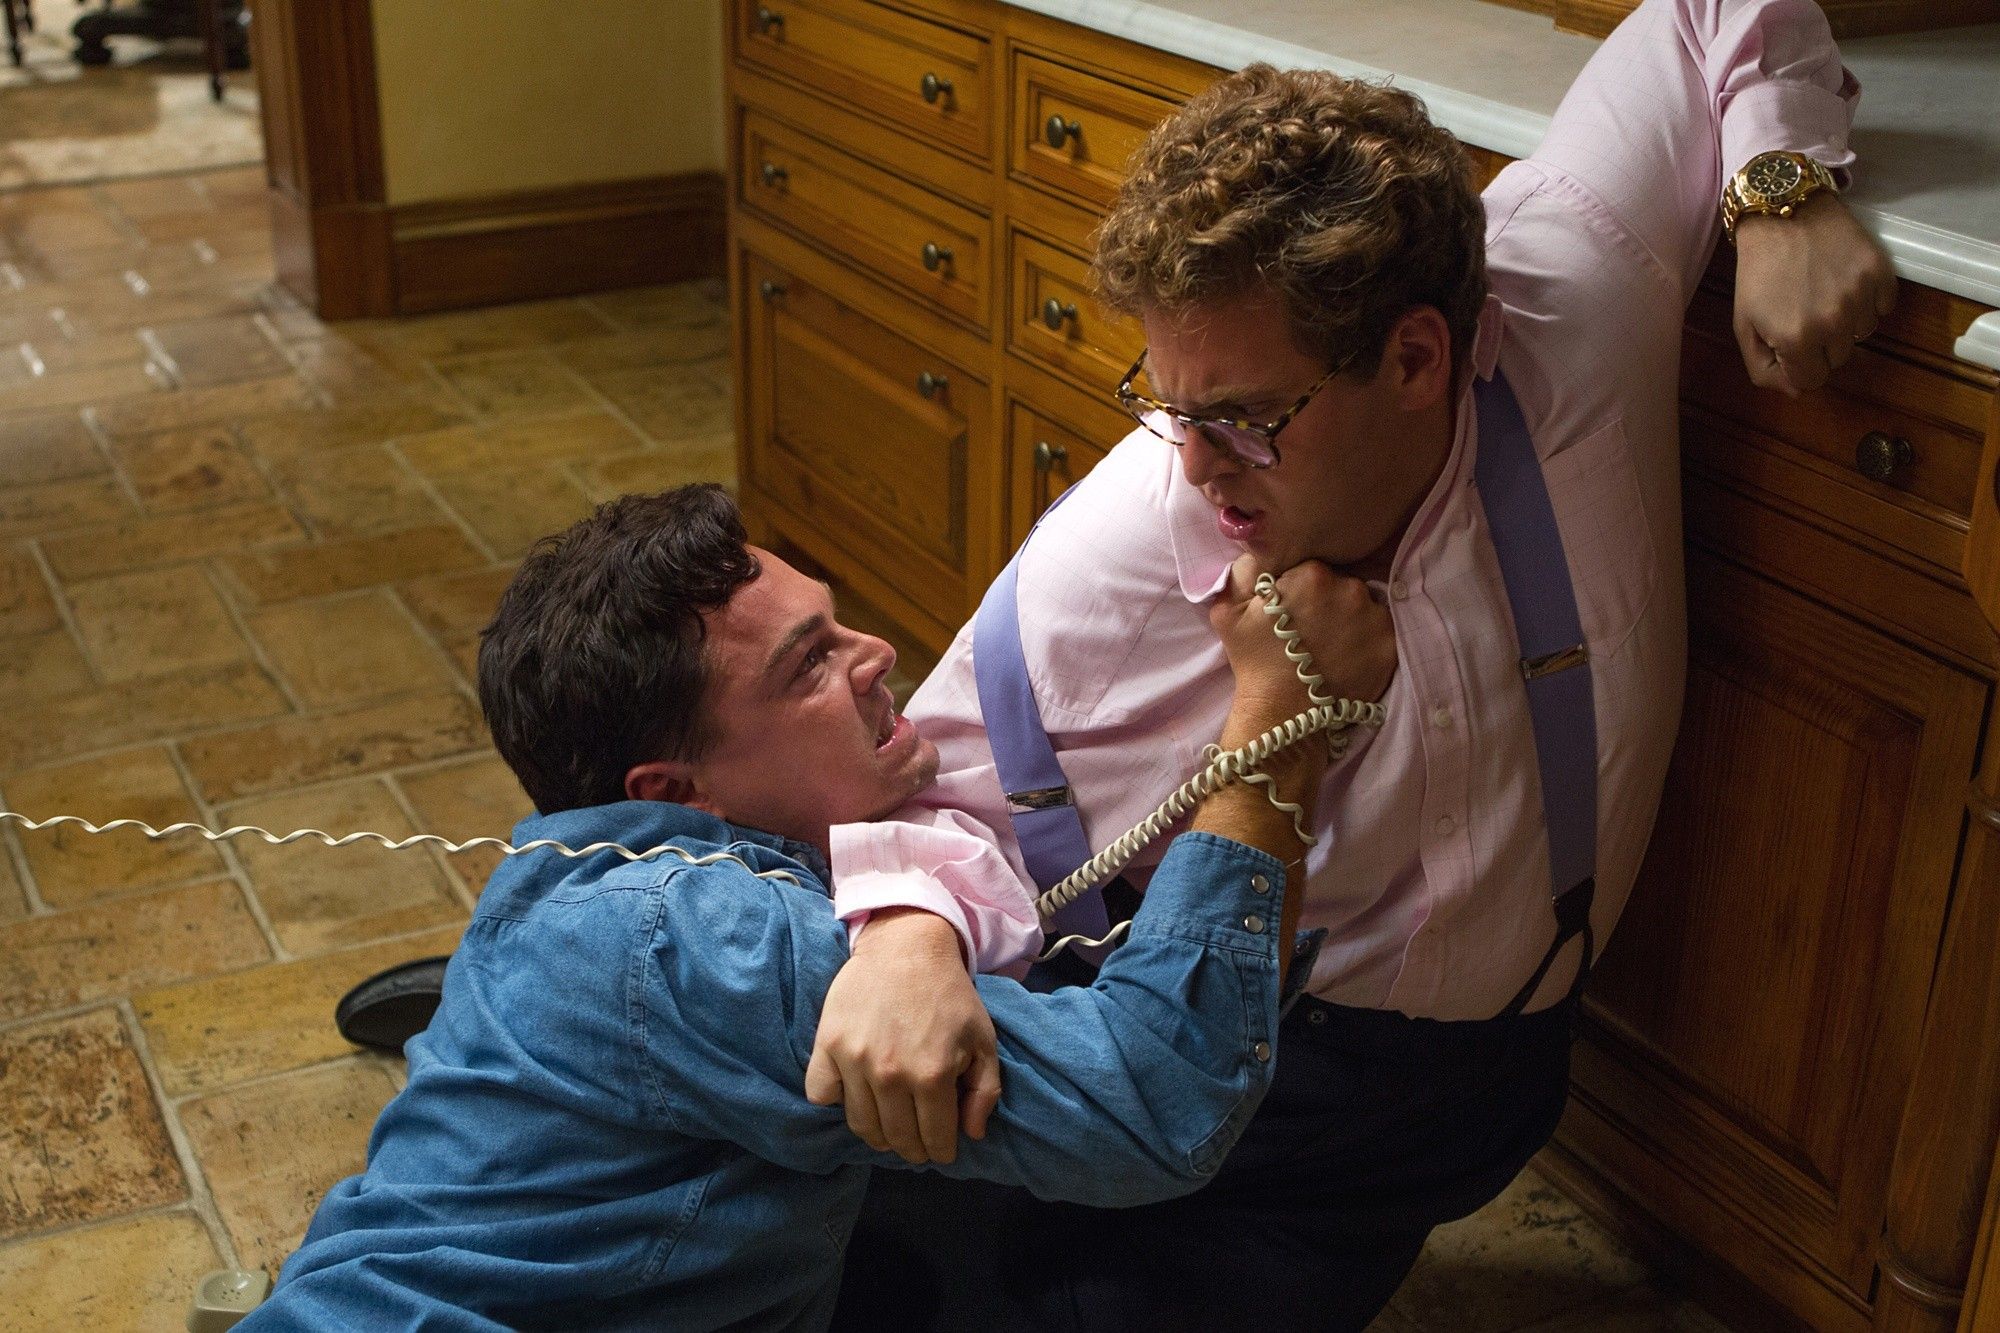 Leonardo DiCaprio stars as Jordan Belfort and Jonah Hill stars as Donnie Azoff in Paramount Pictures' The Wolf of Wall Street (2013)